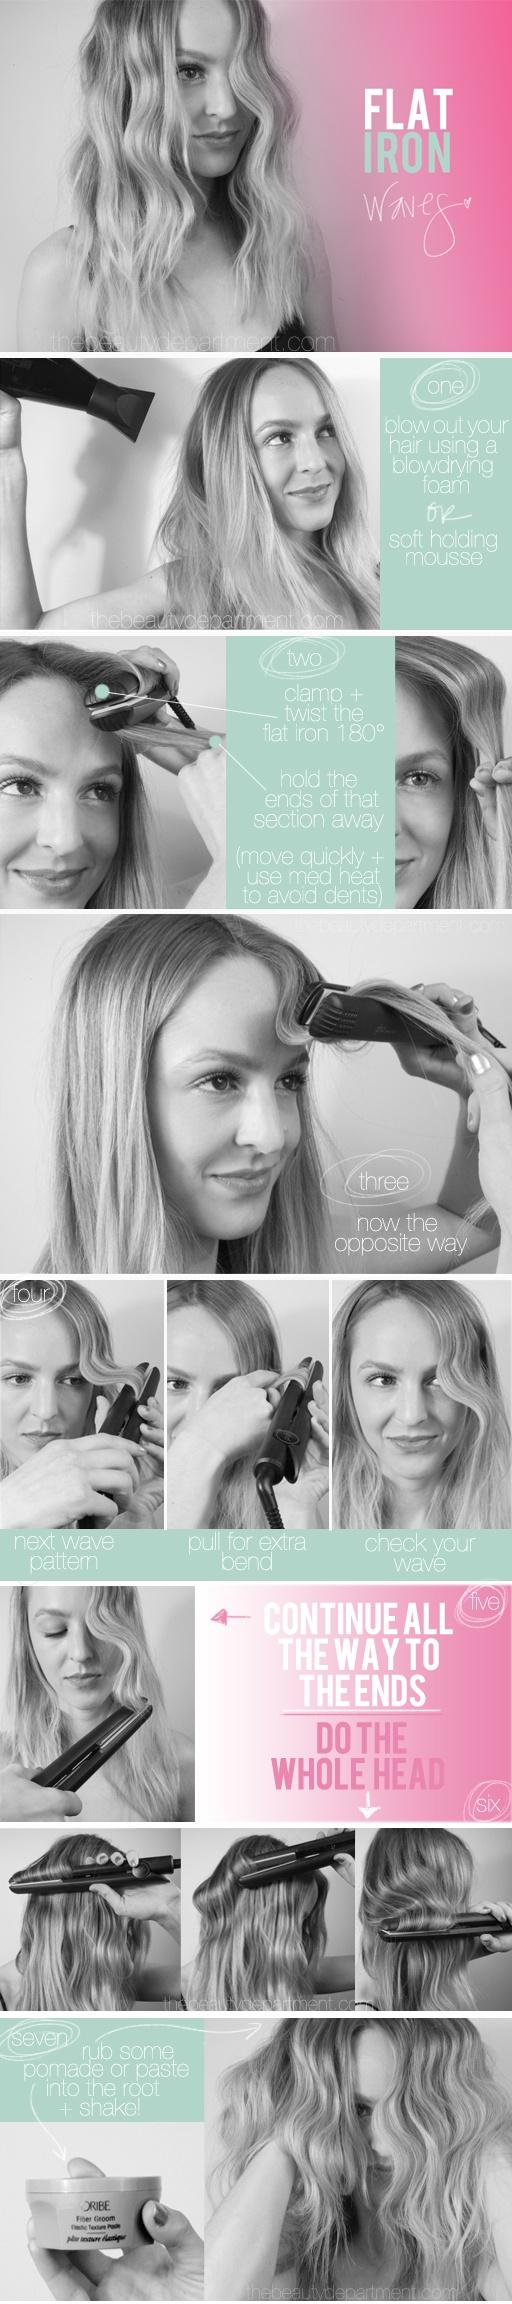 How to Flat Iron Waves